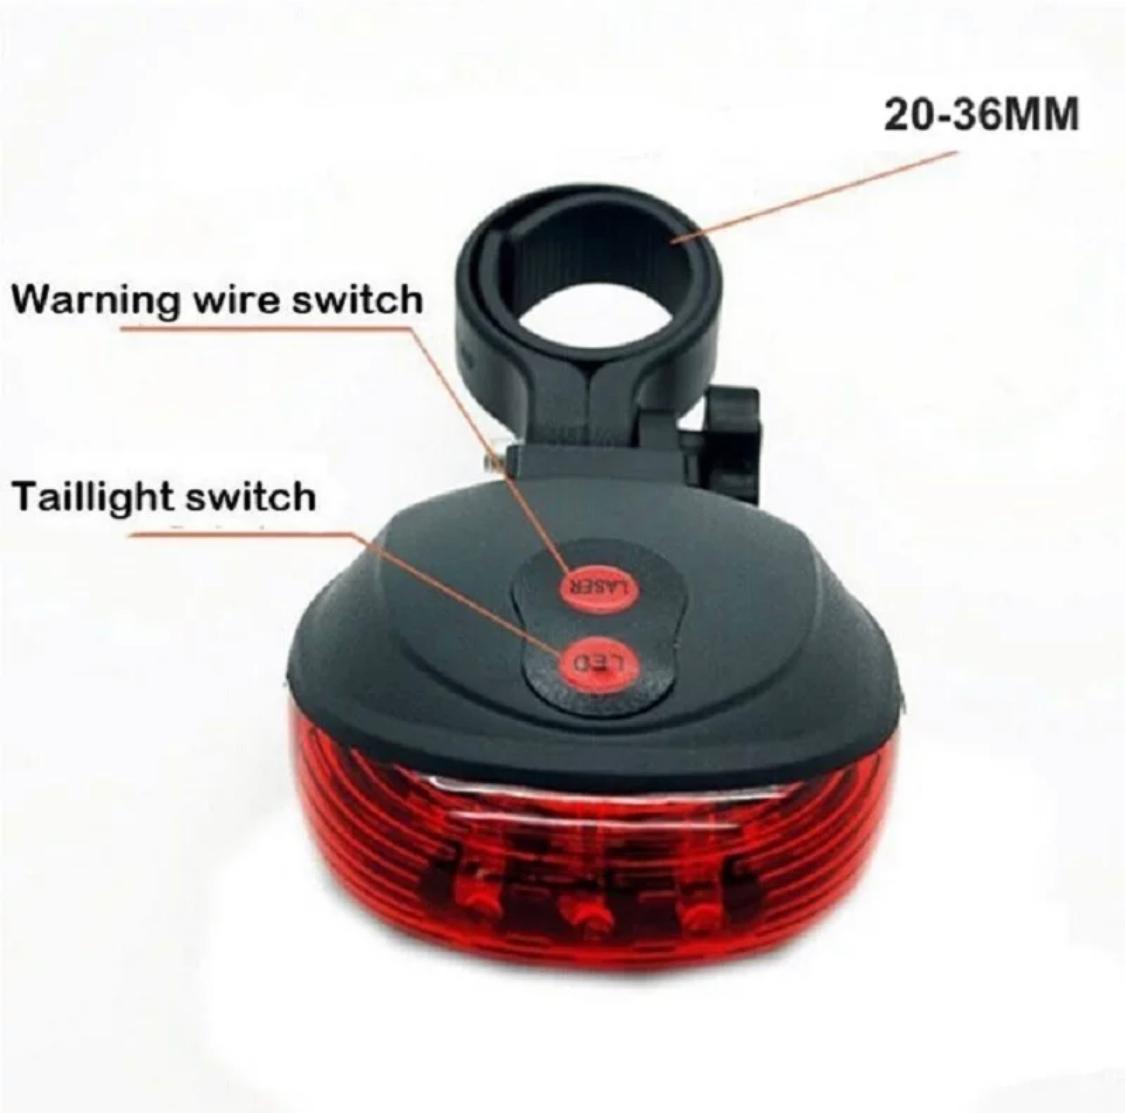 Waterproof Bicycle Light 5LED+2Laser Rear Tail Light for Bicycle